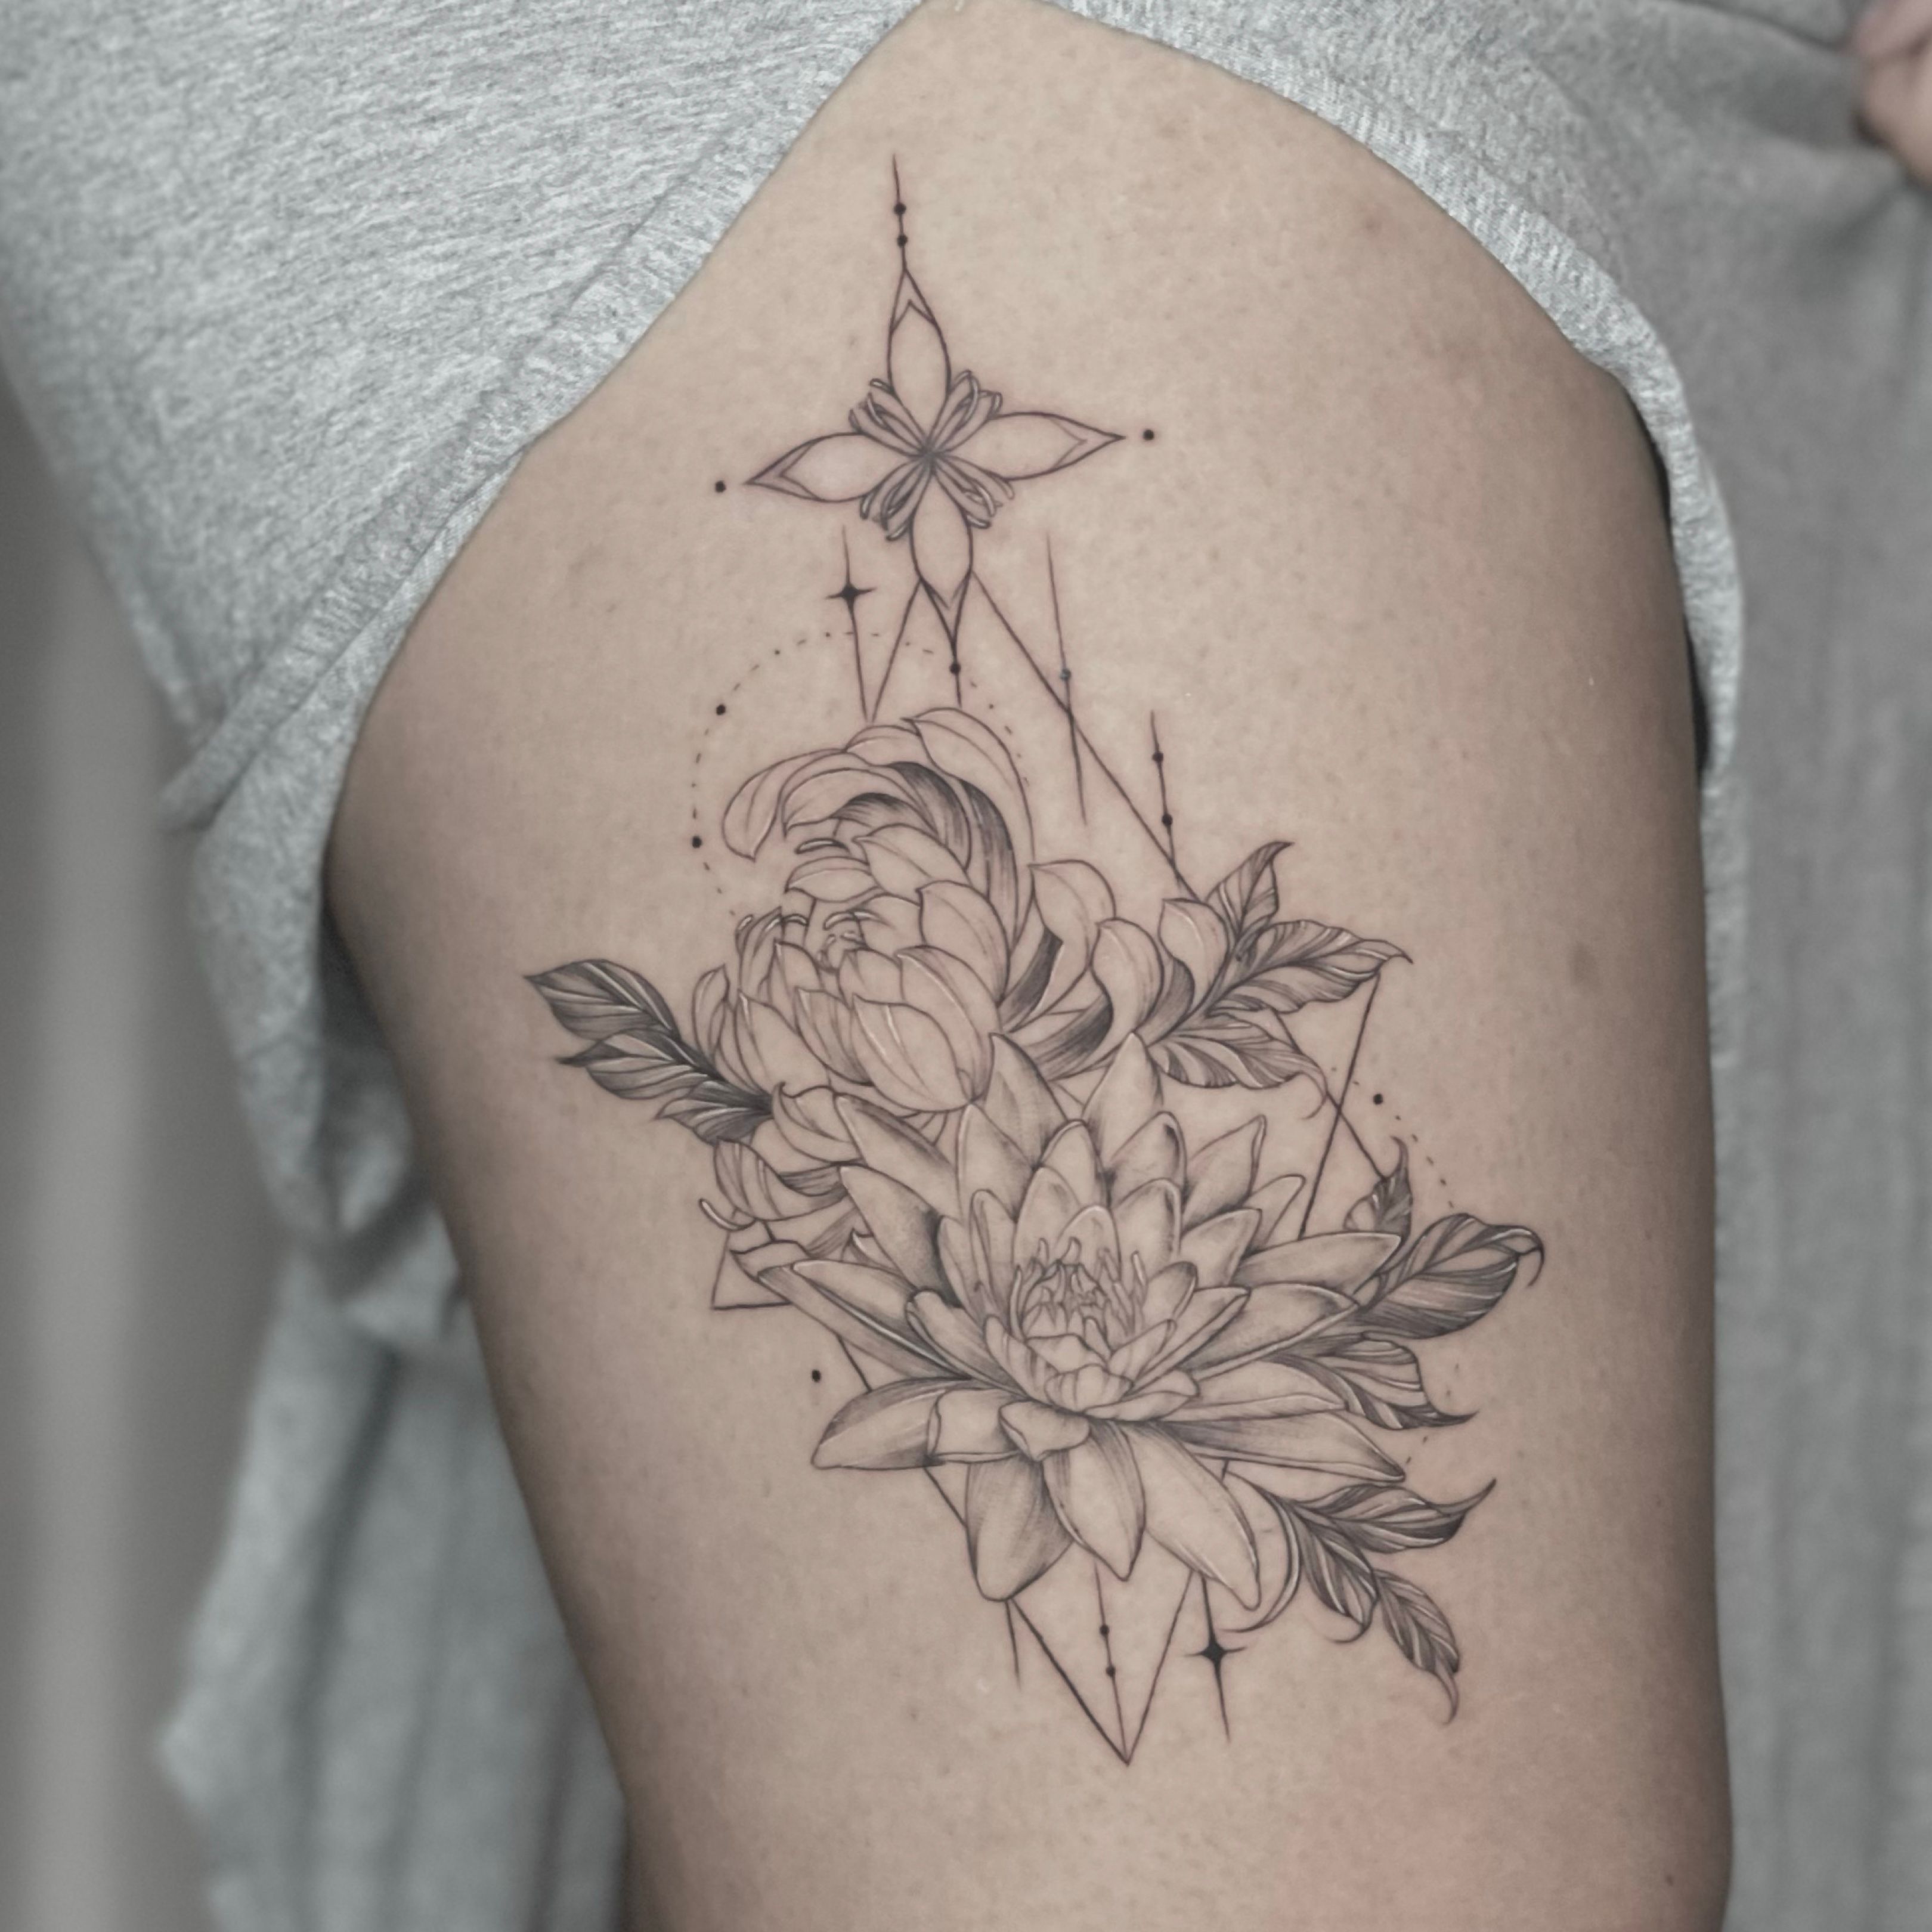 Small Water Lily Tattoo for Minimalist on Hand / Wrist / Ankle / Foot,  Simple Watercolor Water Lily Flower Tattoo, Tiny Purple Floral Tattoo - Etsy